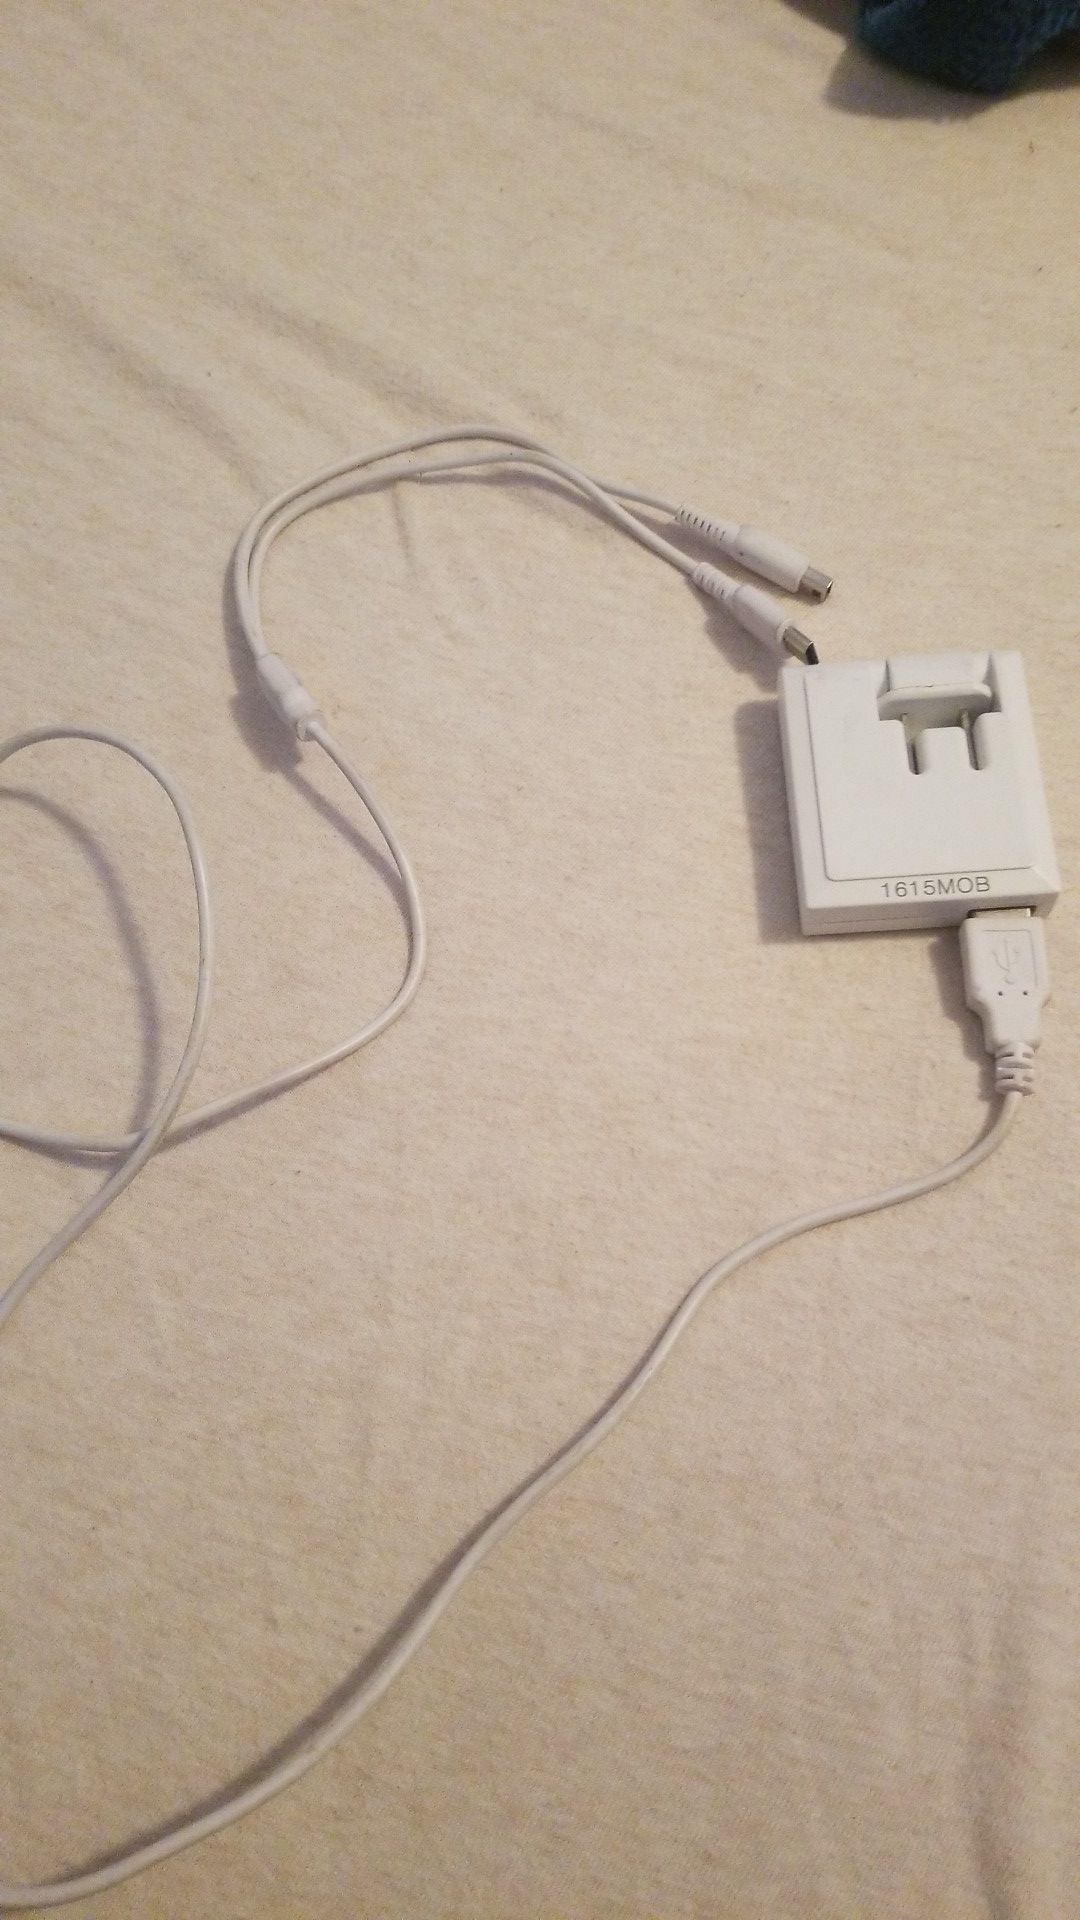 Nintendo 3Ds and Nintendo Ds double charger